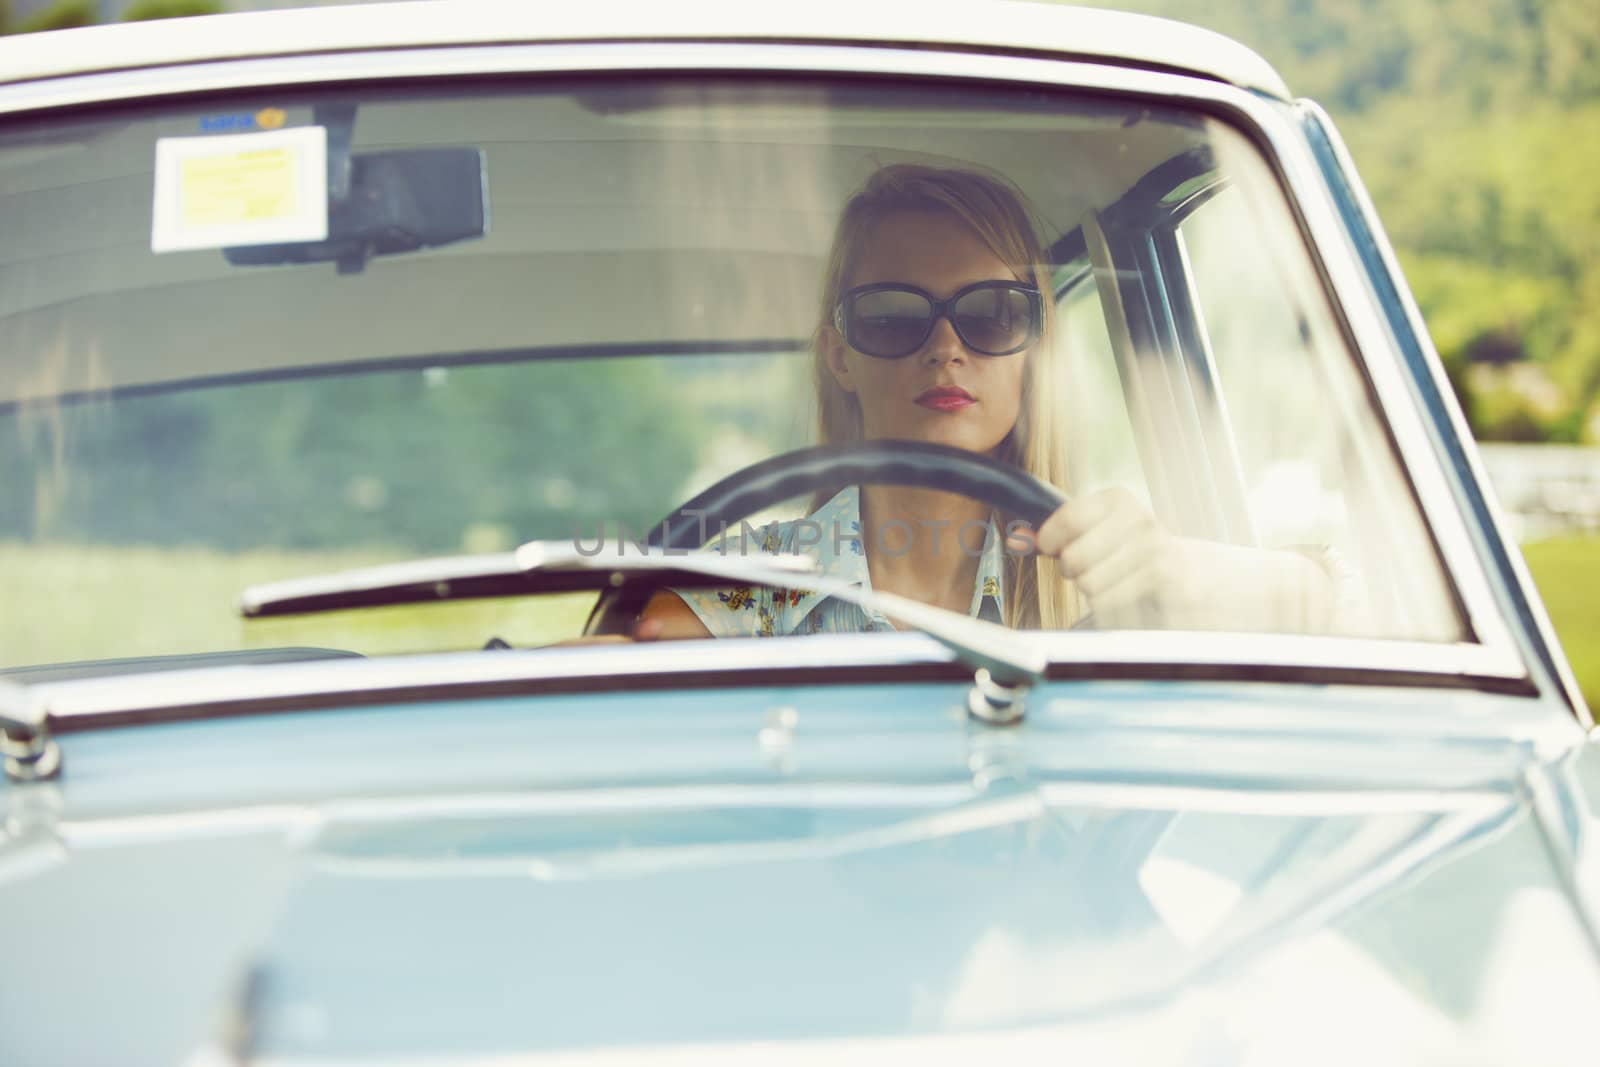 Young woman driving vintage car.